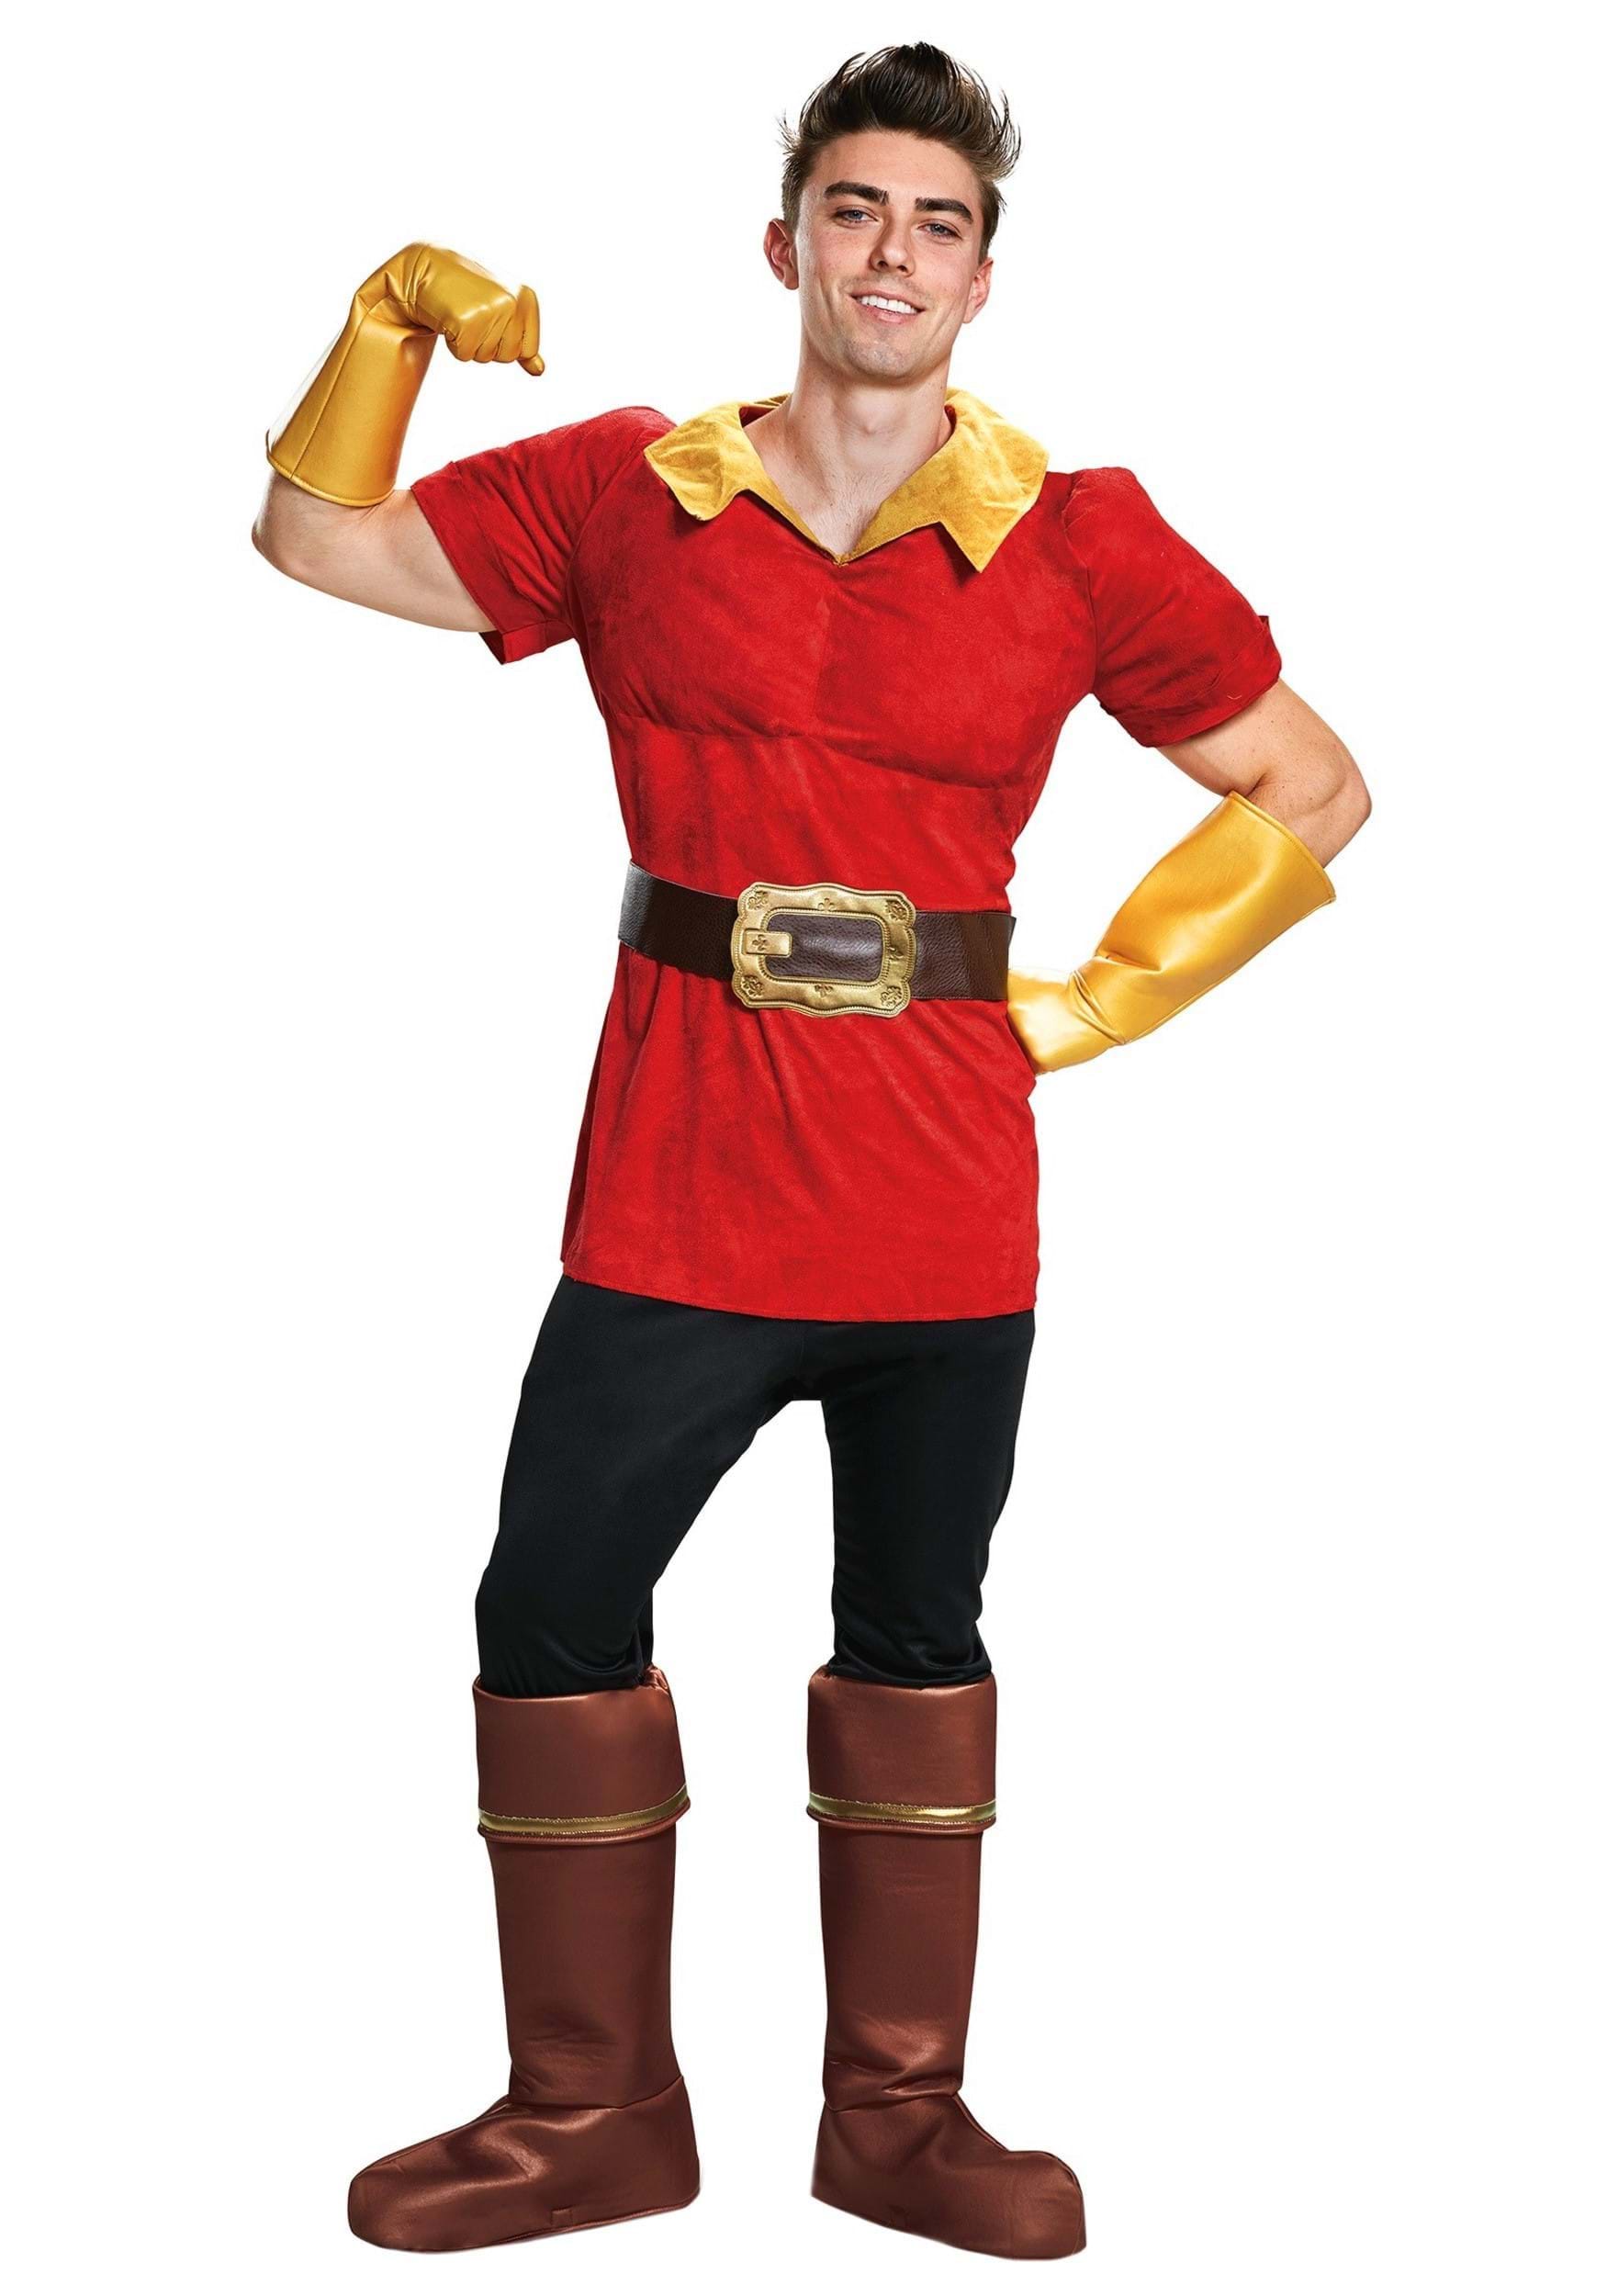 Image of Disney Beauty and the Beast Gaston Costume for Men ID DI79933-3X